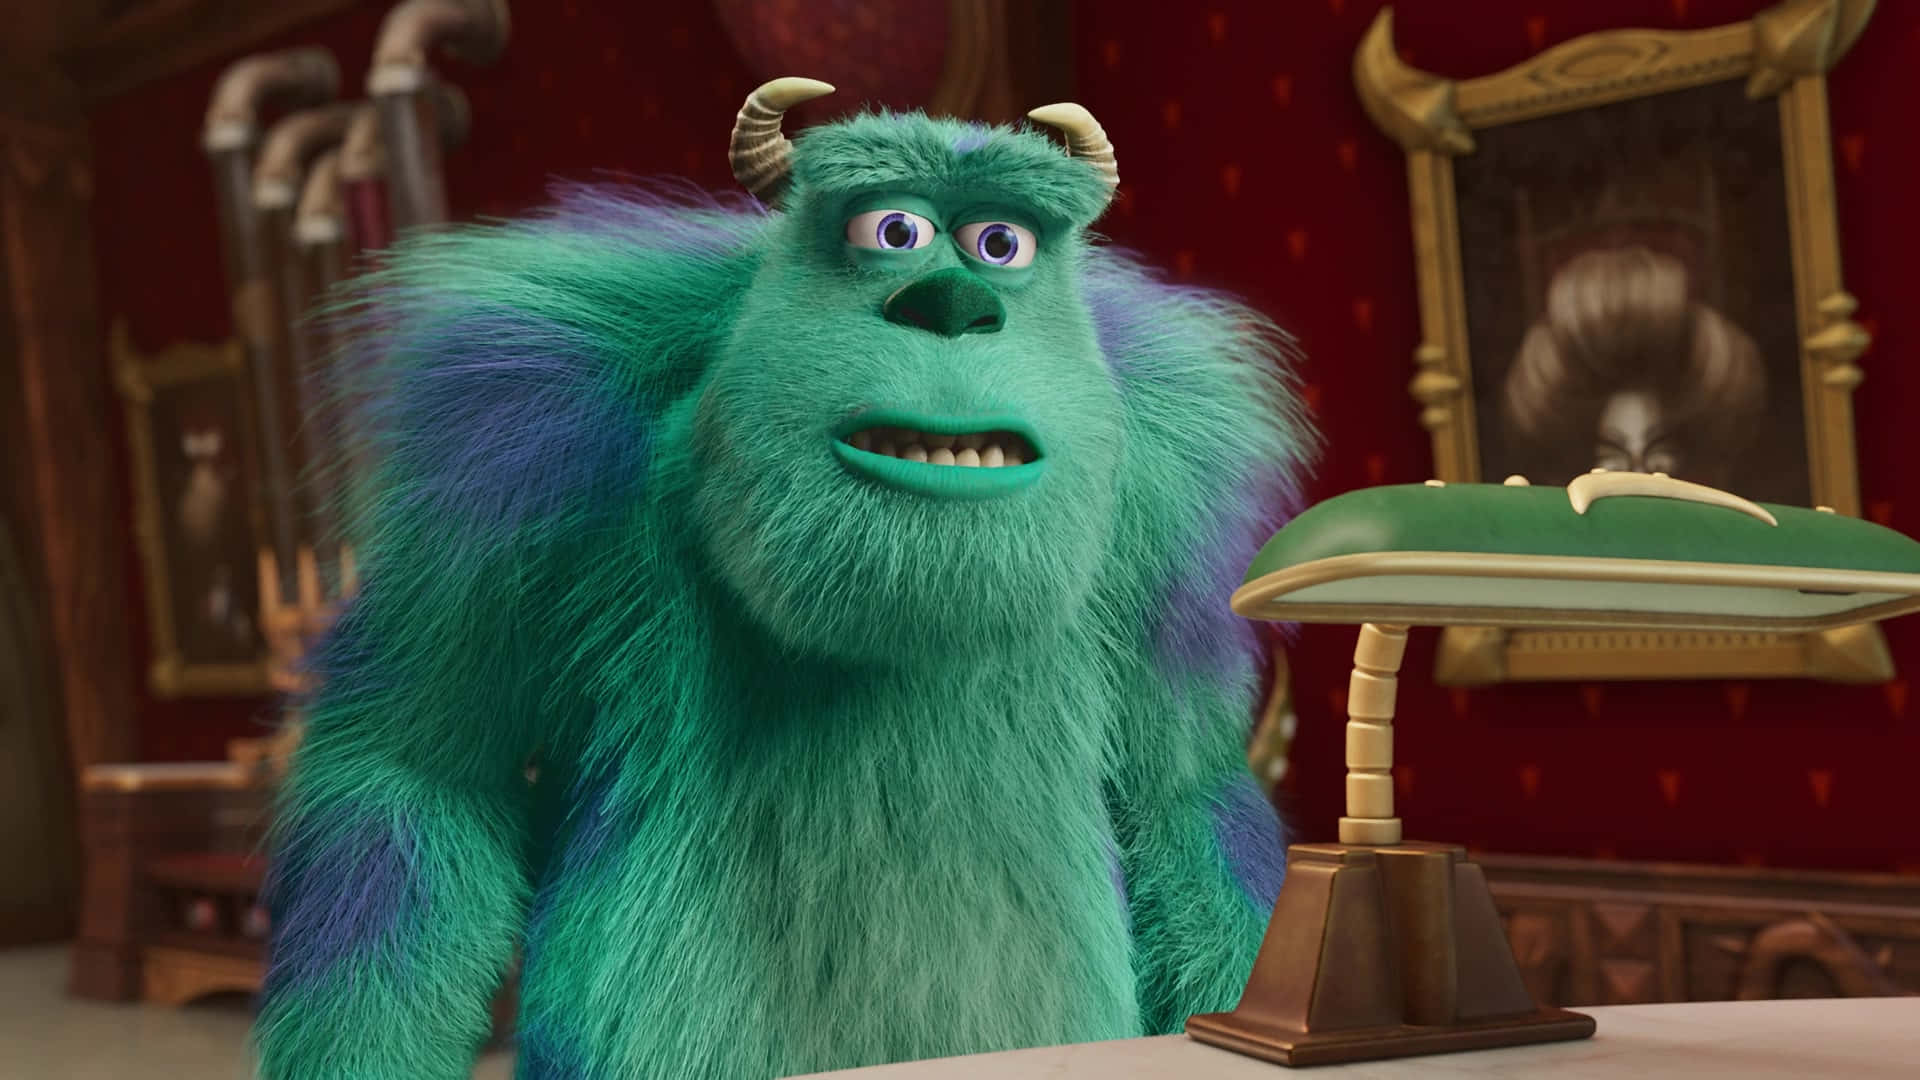 "Celebrate Friendship - Mike and Sulley from Monsters Inc"